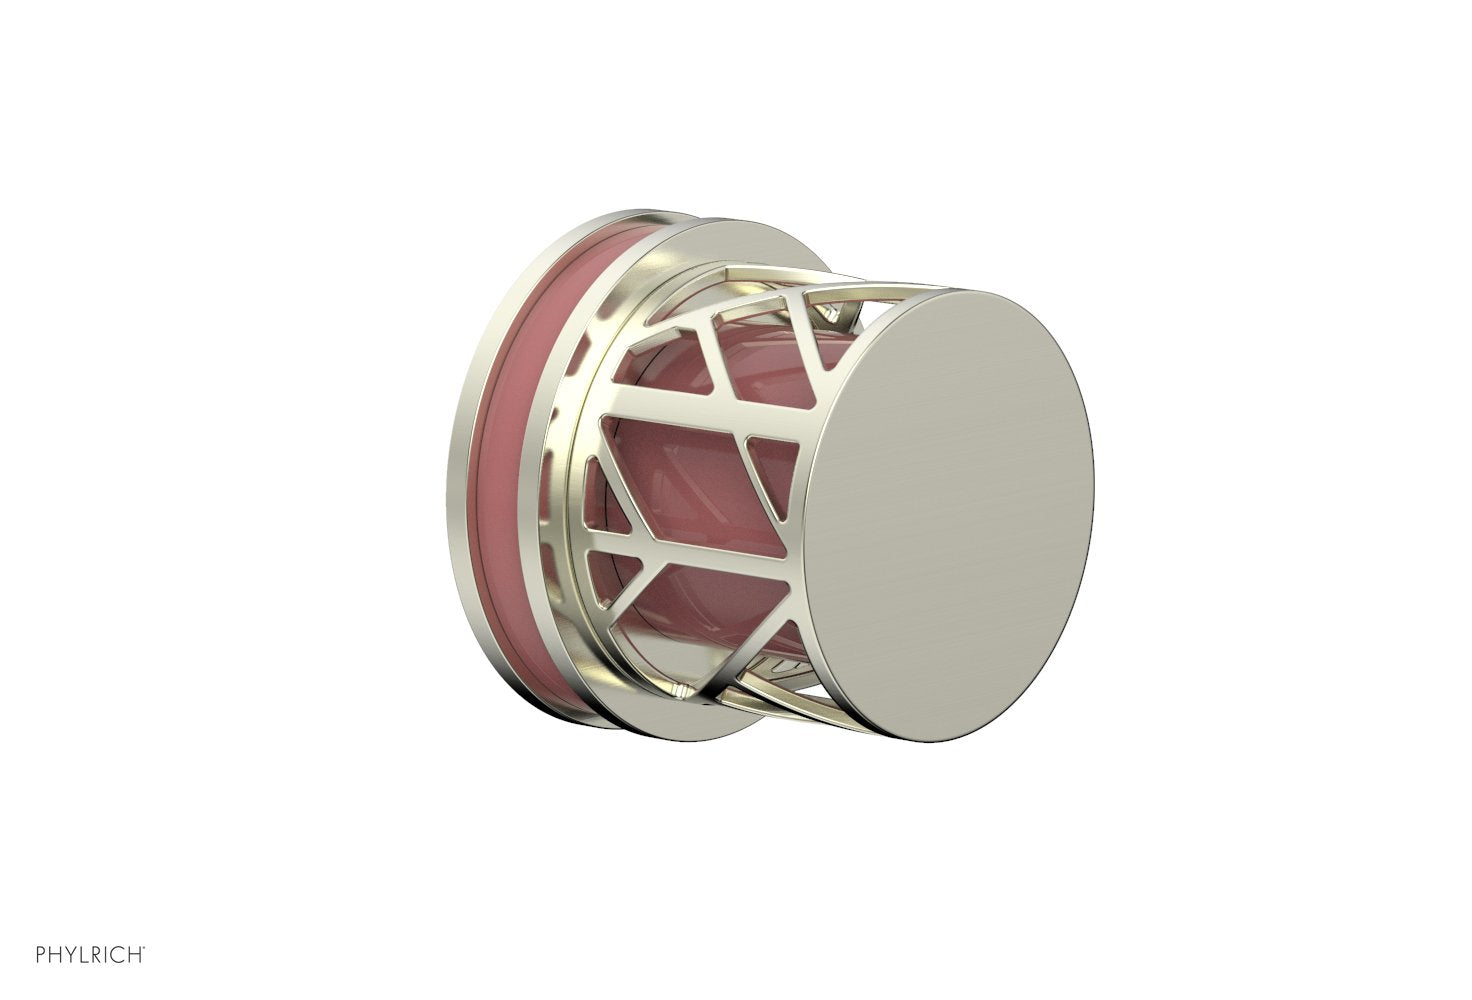 Phylrich JOLIE Volume Control/Diverter Trim - Round Handle with "Pink" Accents